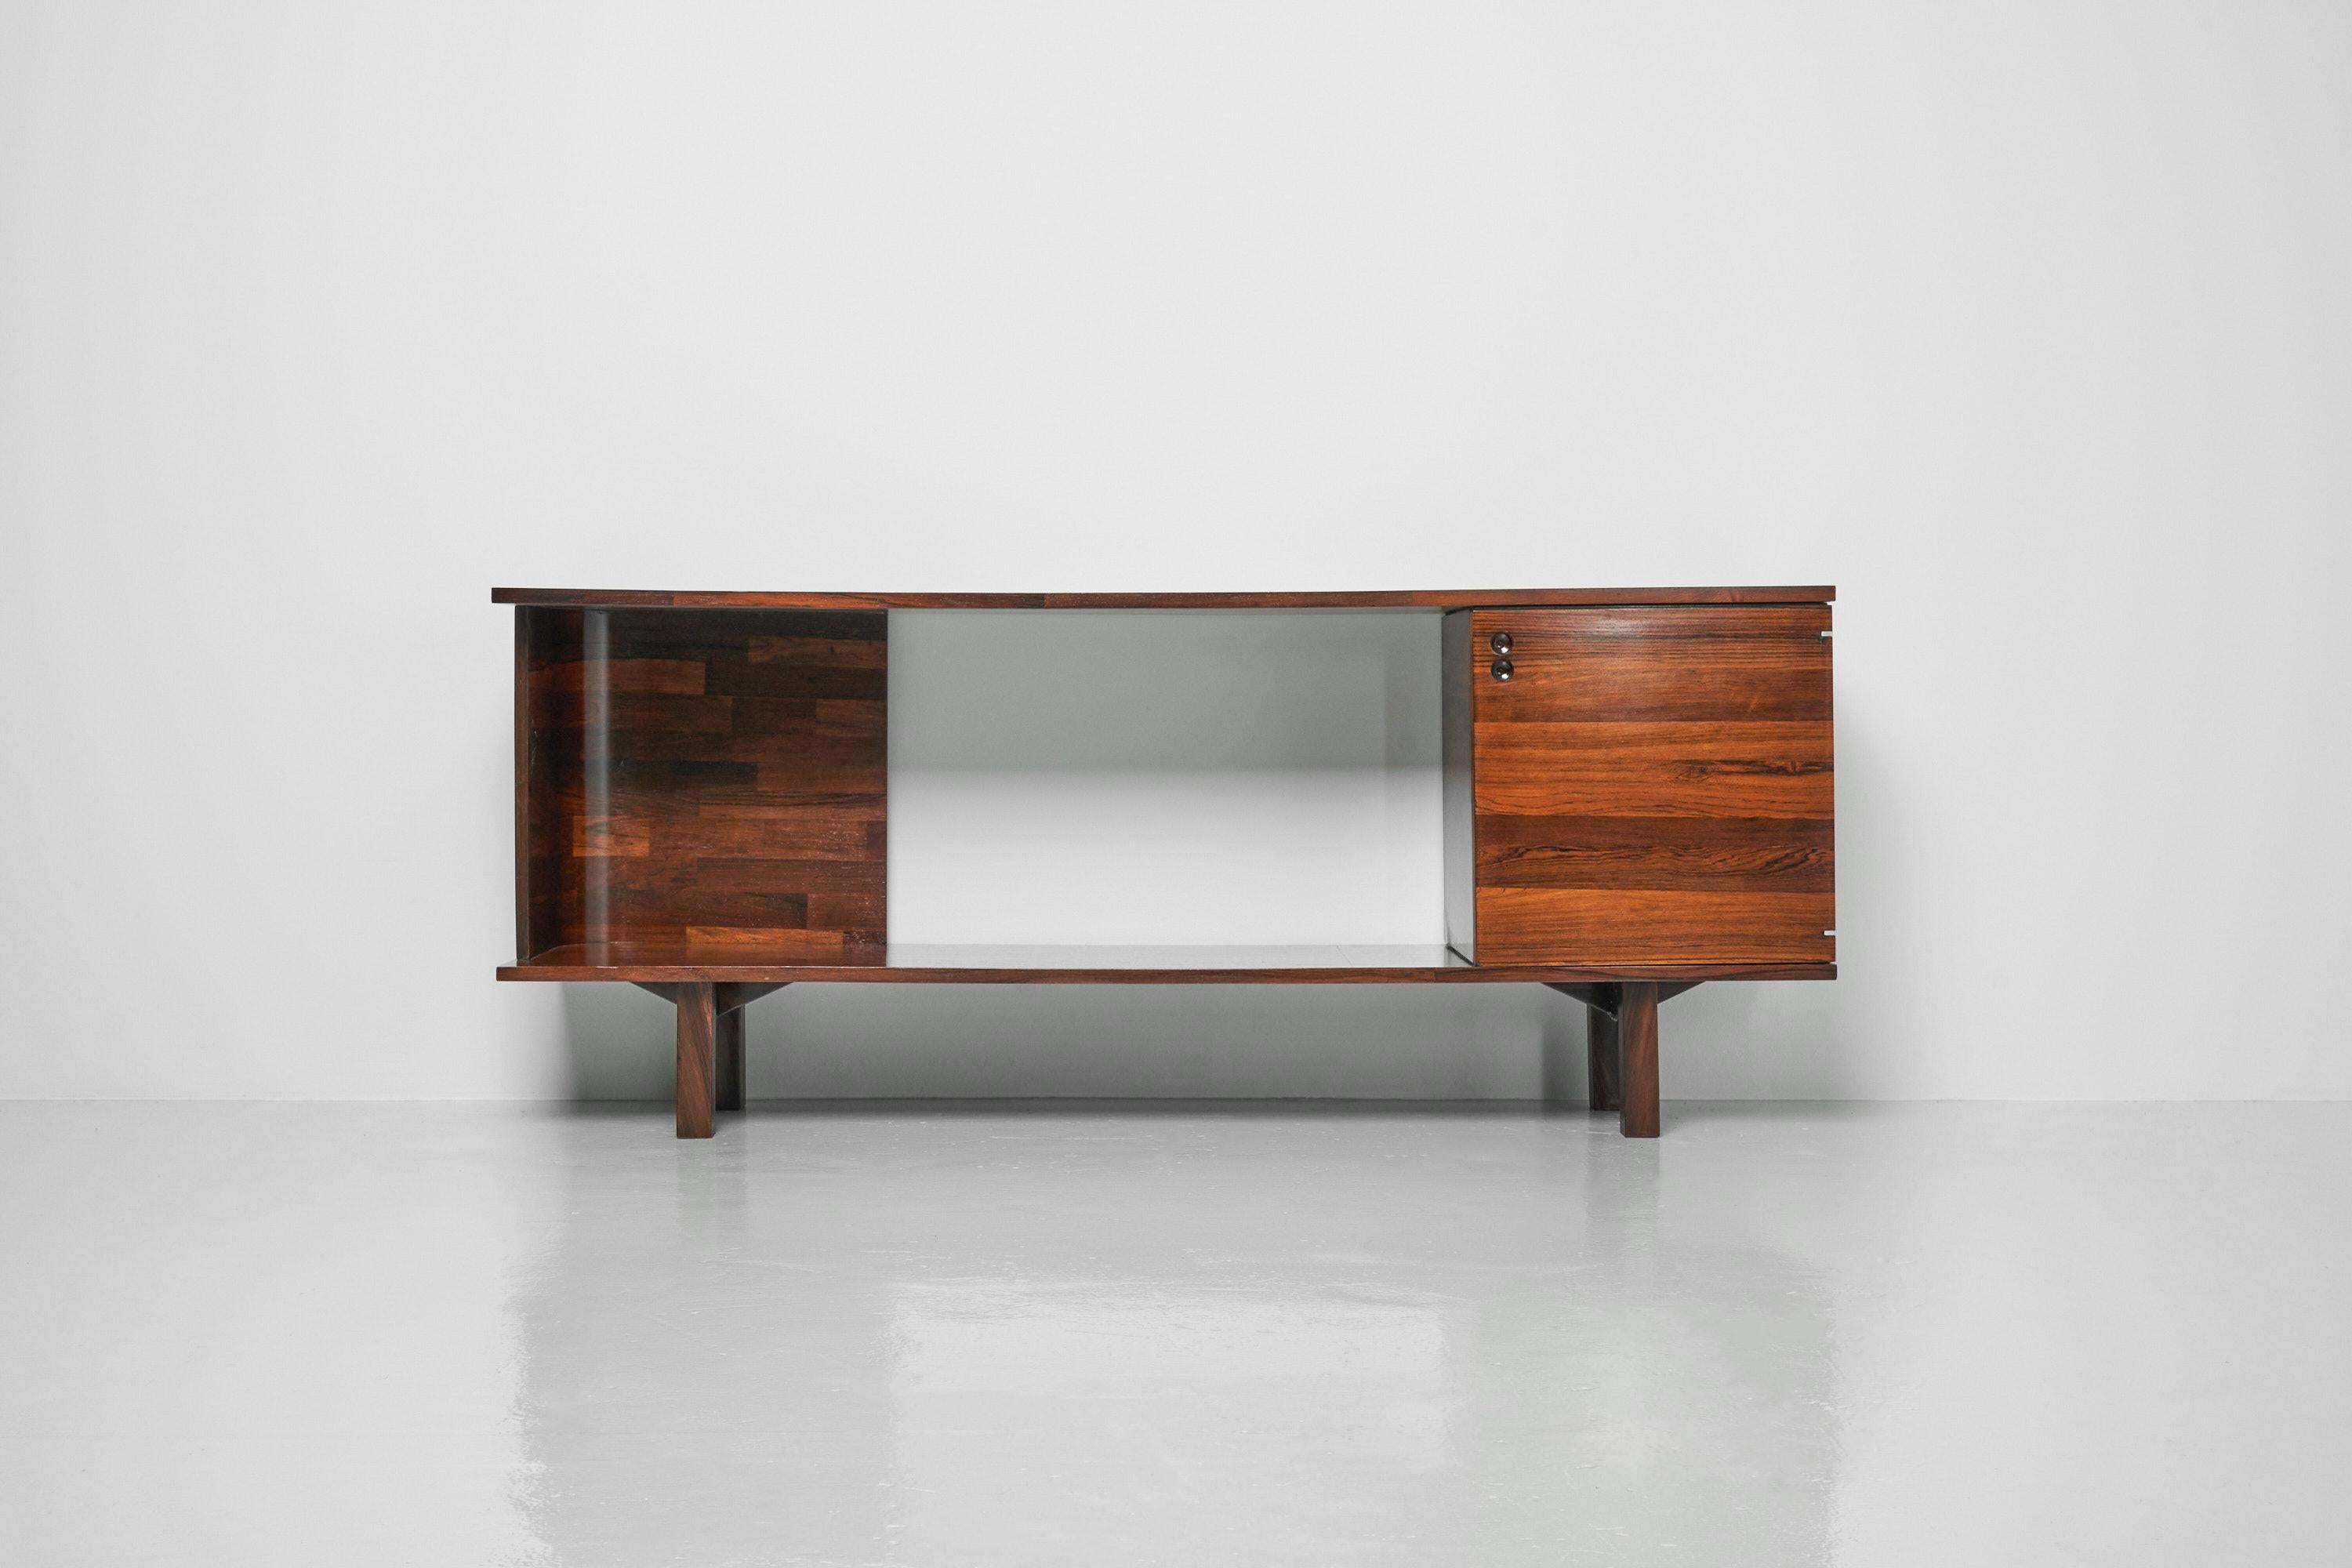 Very nice small sized and sophisticated sideboard from the componivel series designed by Jorge Zalszupin and manufactured by his own company L'Atelier, Brazil 1959. Modular furniture by Jorge is instantly recognizable, as he was the first one to